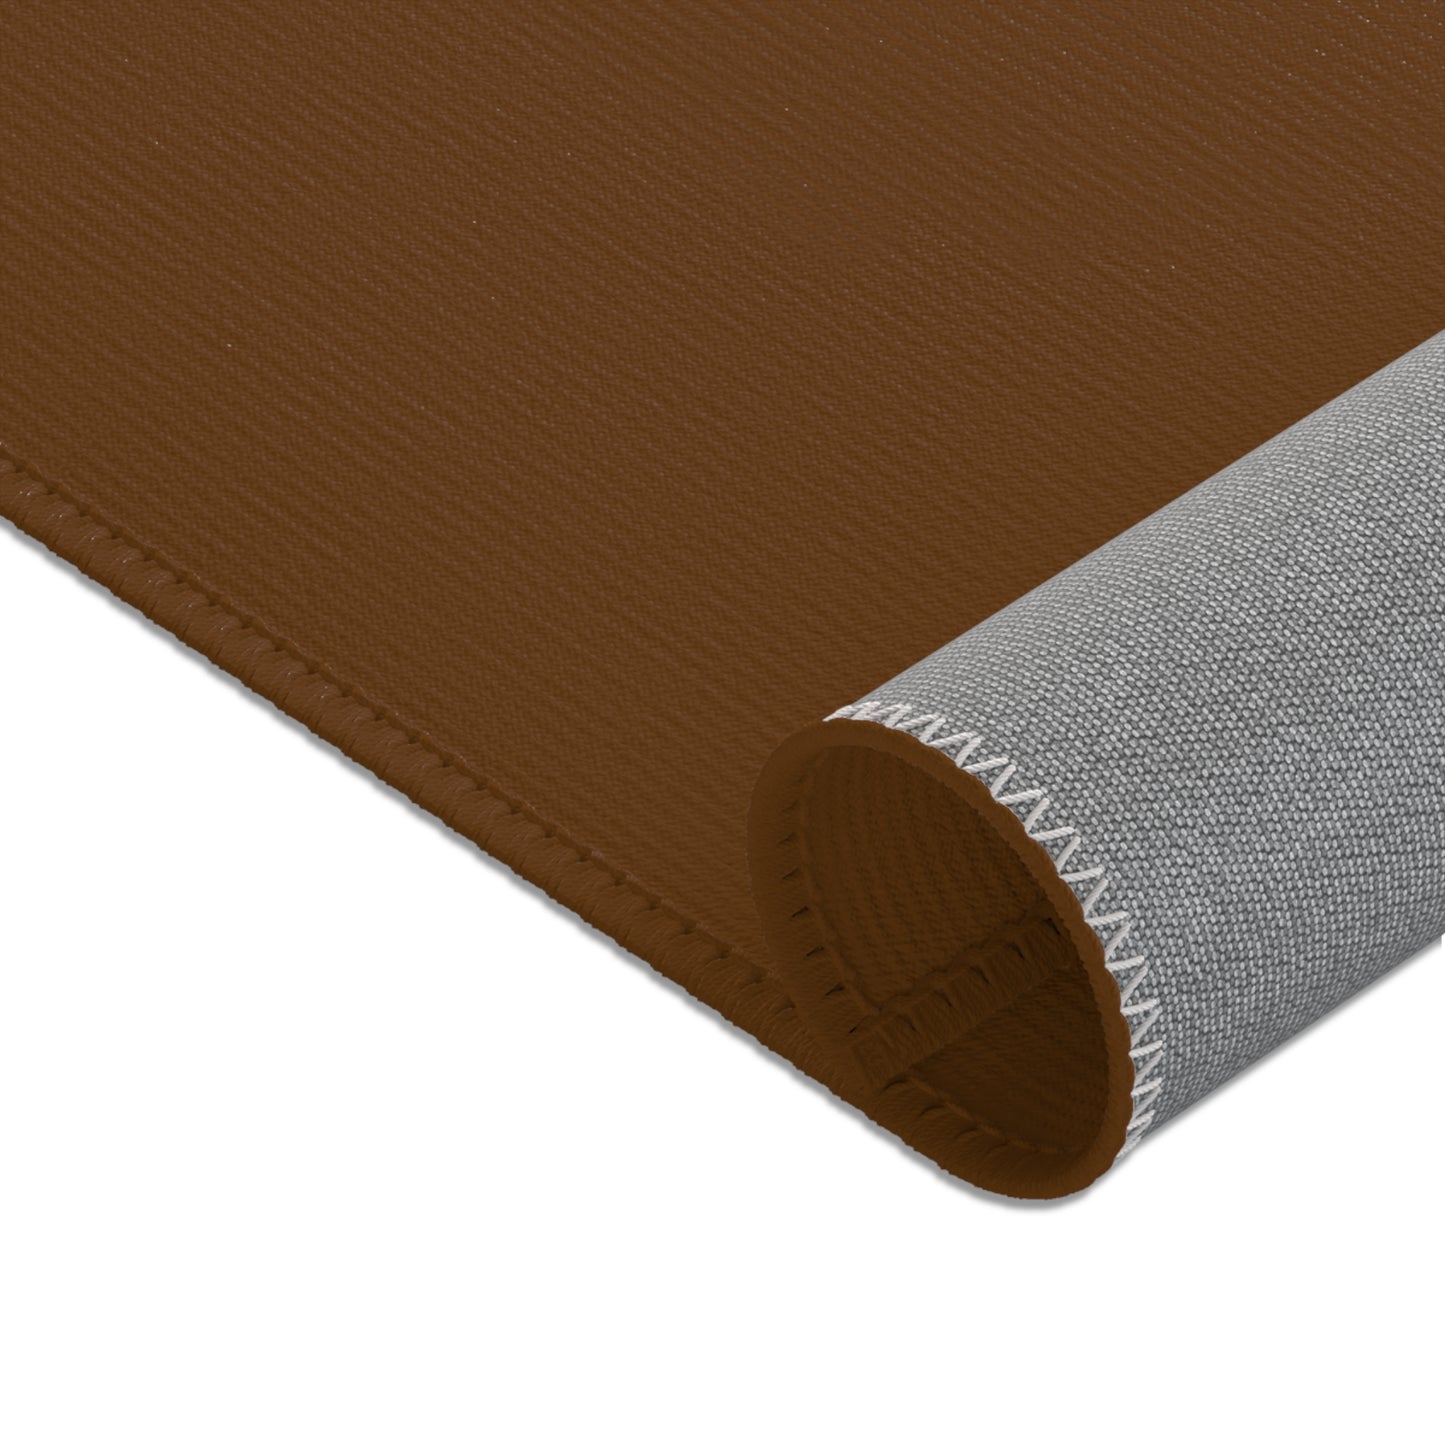 Area Rug (Rectangle): Weightlifting Brown